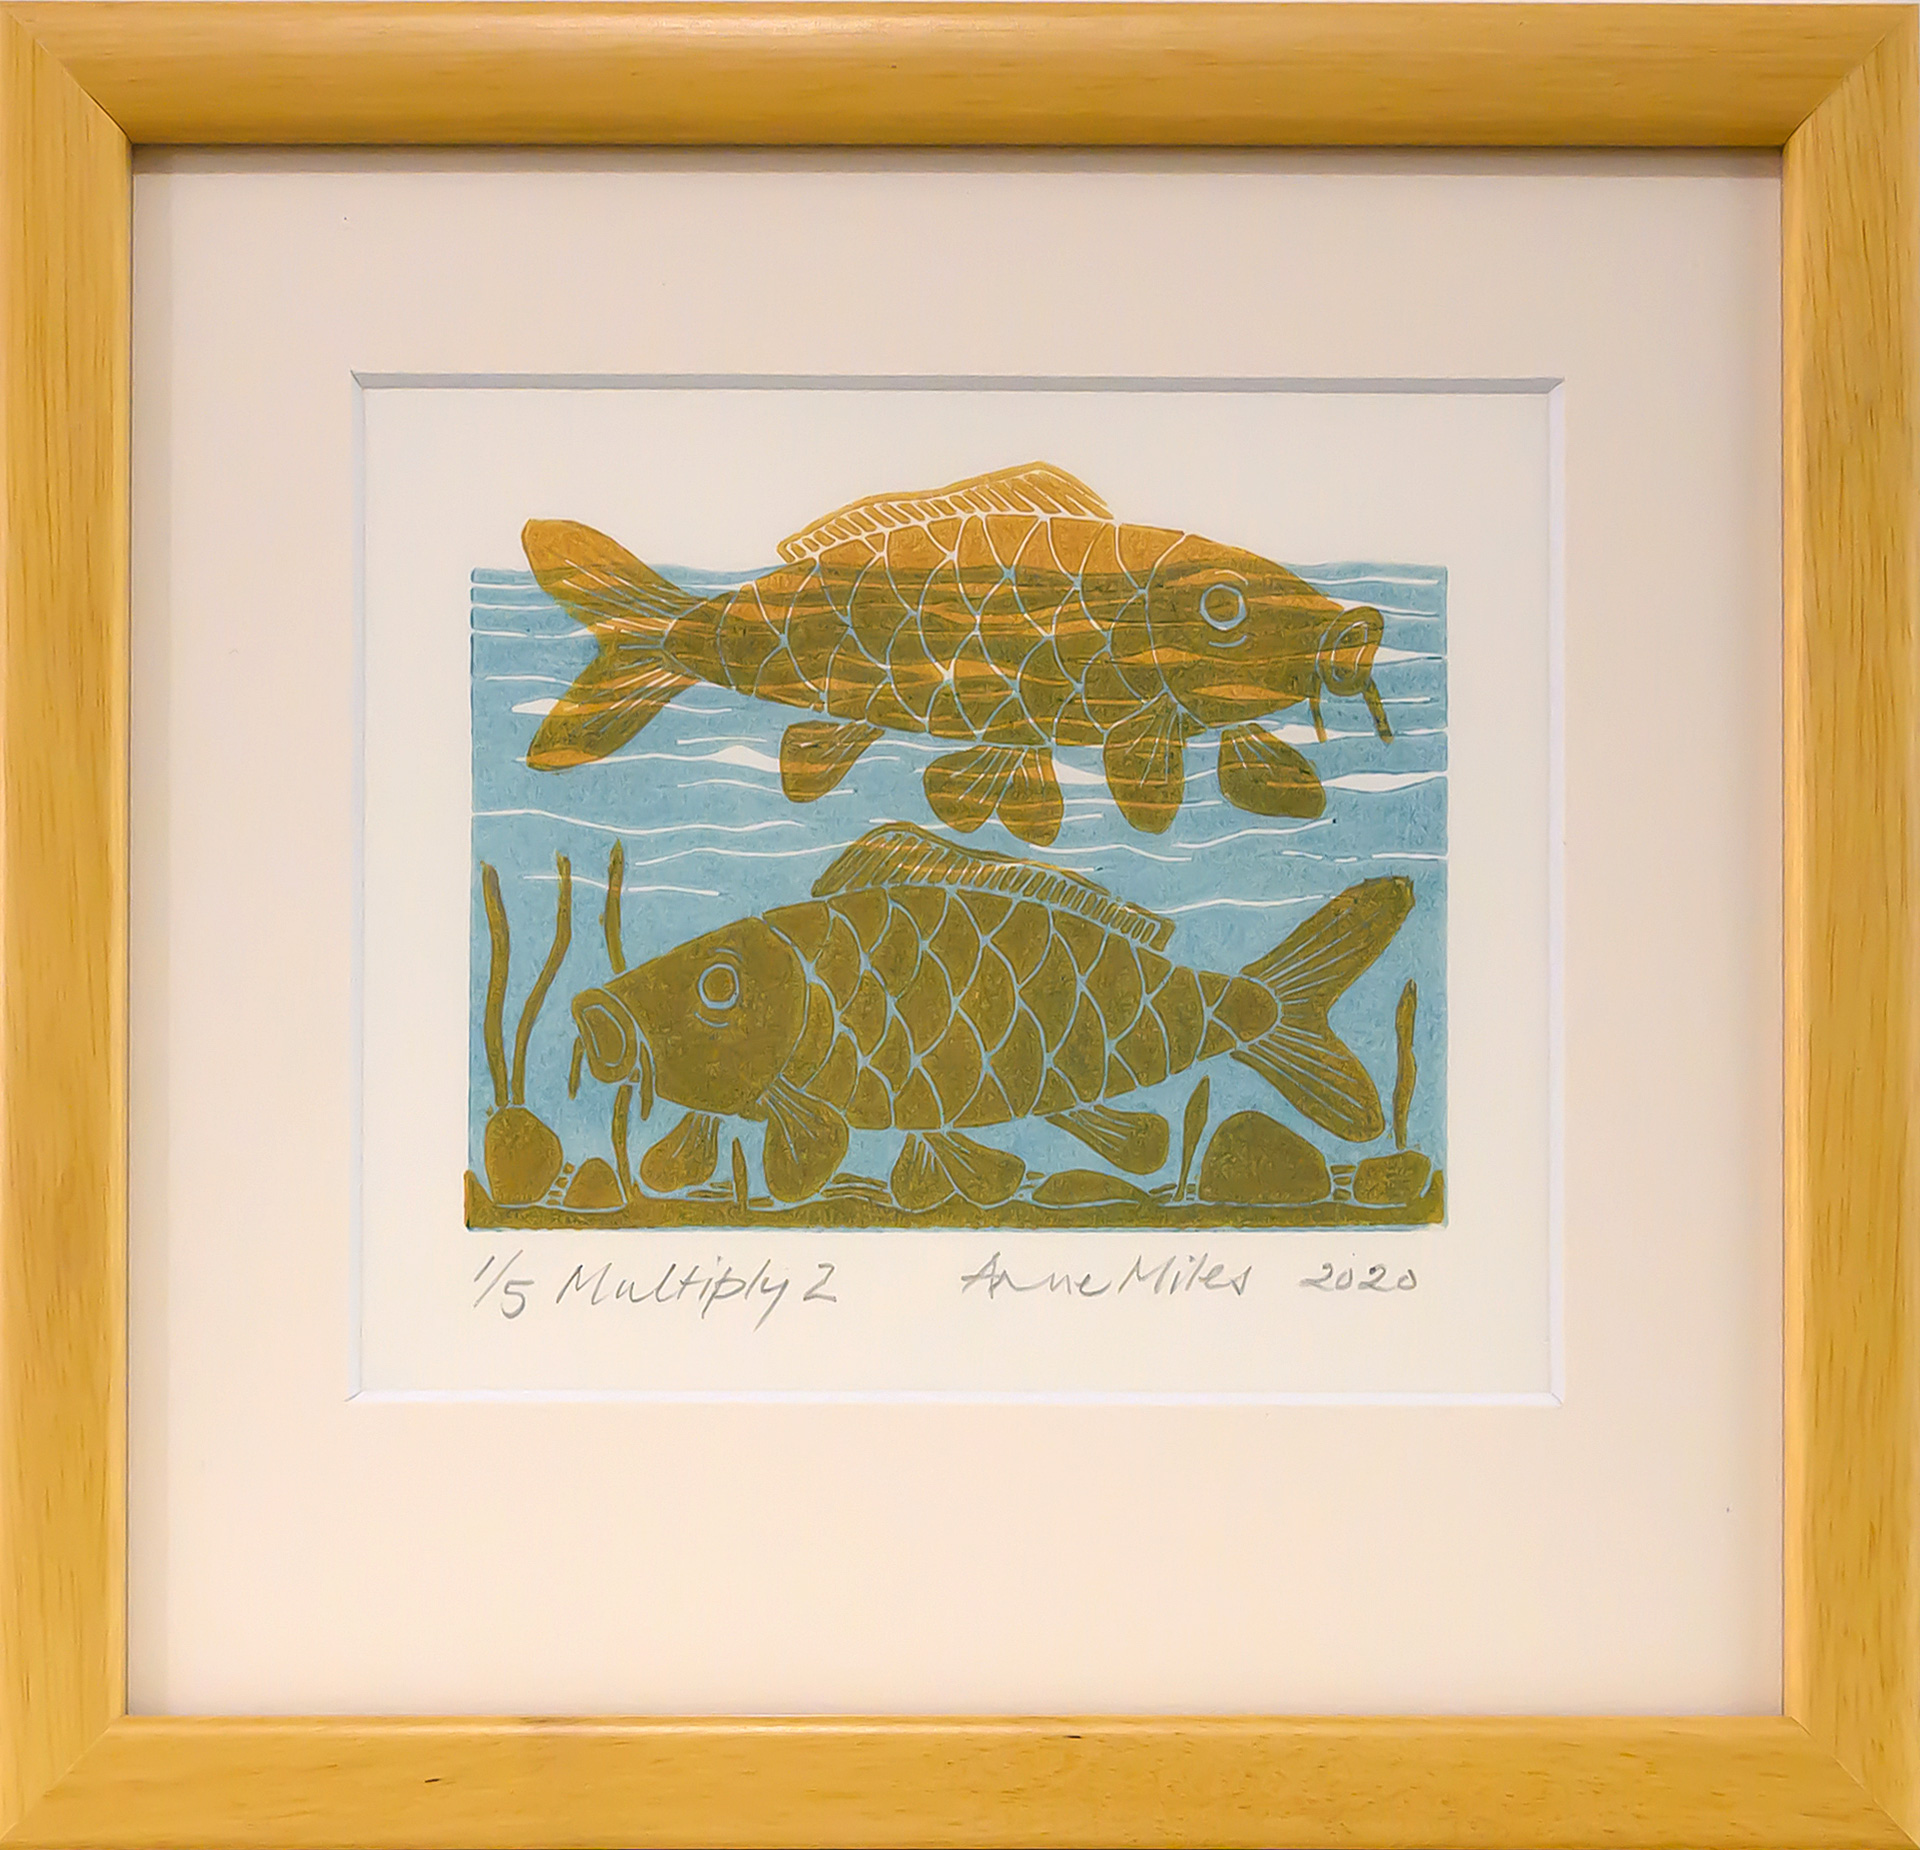 Framed artwork by Anne Miles of 2 yellow Carp with rocks and weeds in a blue water background